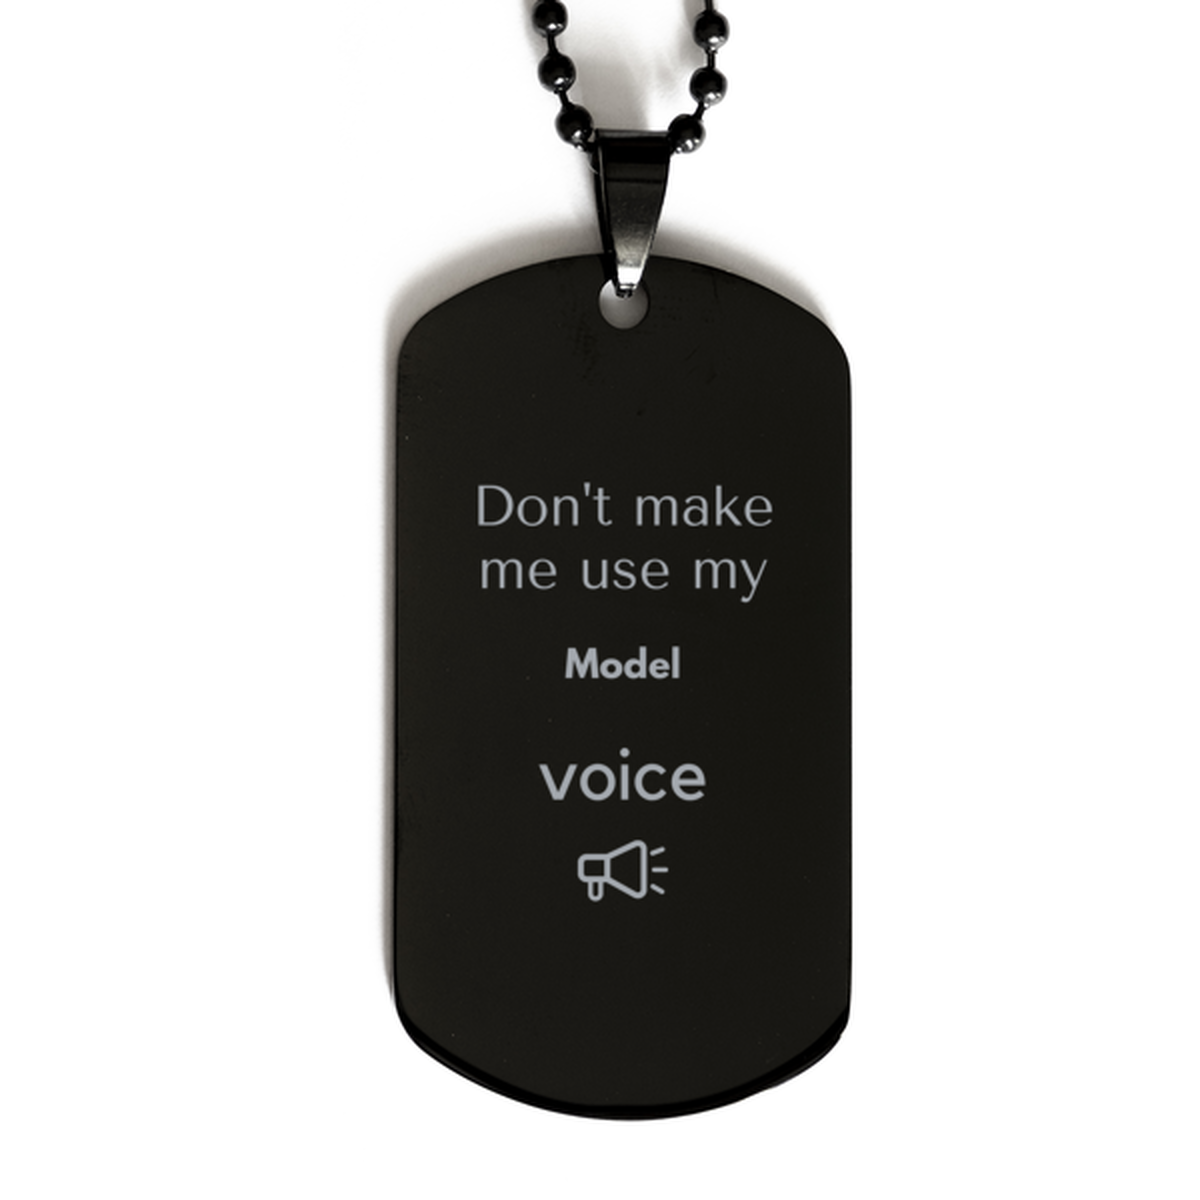 Don't make me use my Model voice, Sarcasm Model Gifts, Christmas Model Black Dog Tag Birthday Unique Gifts For Model Coworkers, Men, Women, Colleague, Friends